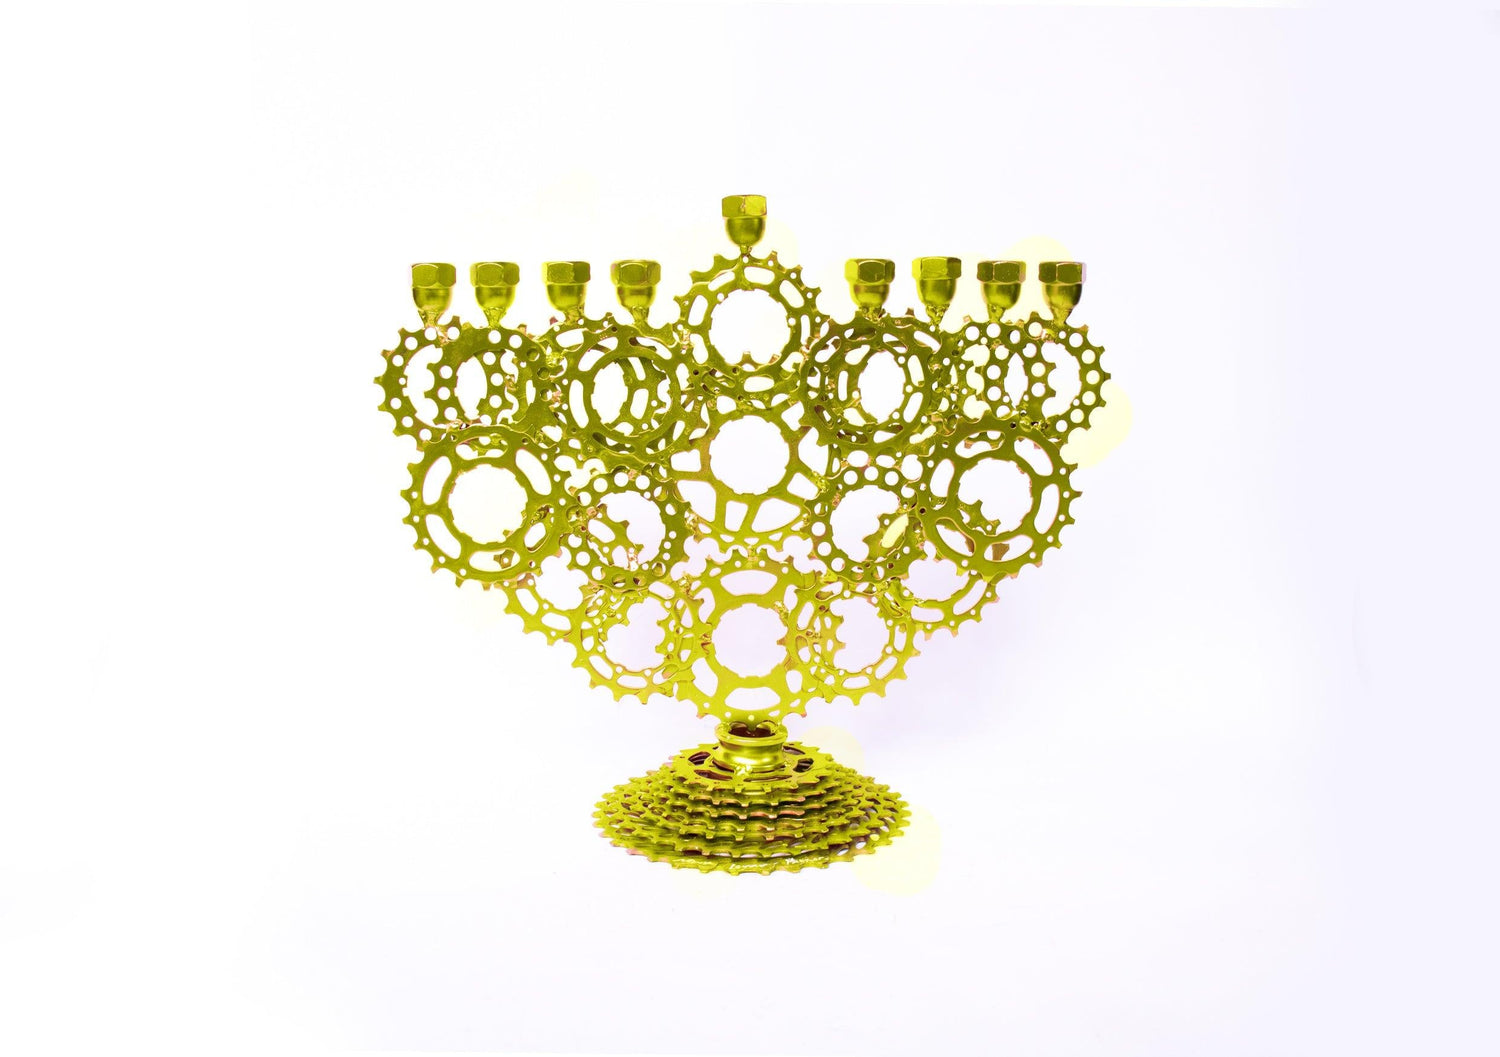 Sara Small - Menorah sculpture, made of bicycle parts | UNCHAINED by NIRIT LEVAV PACKER